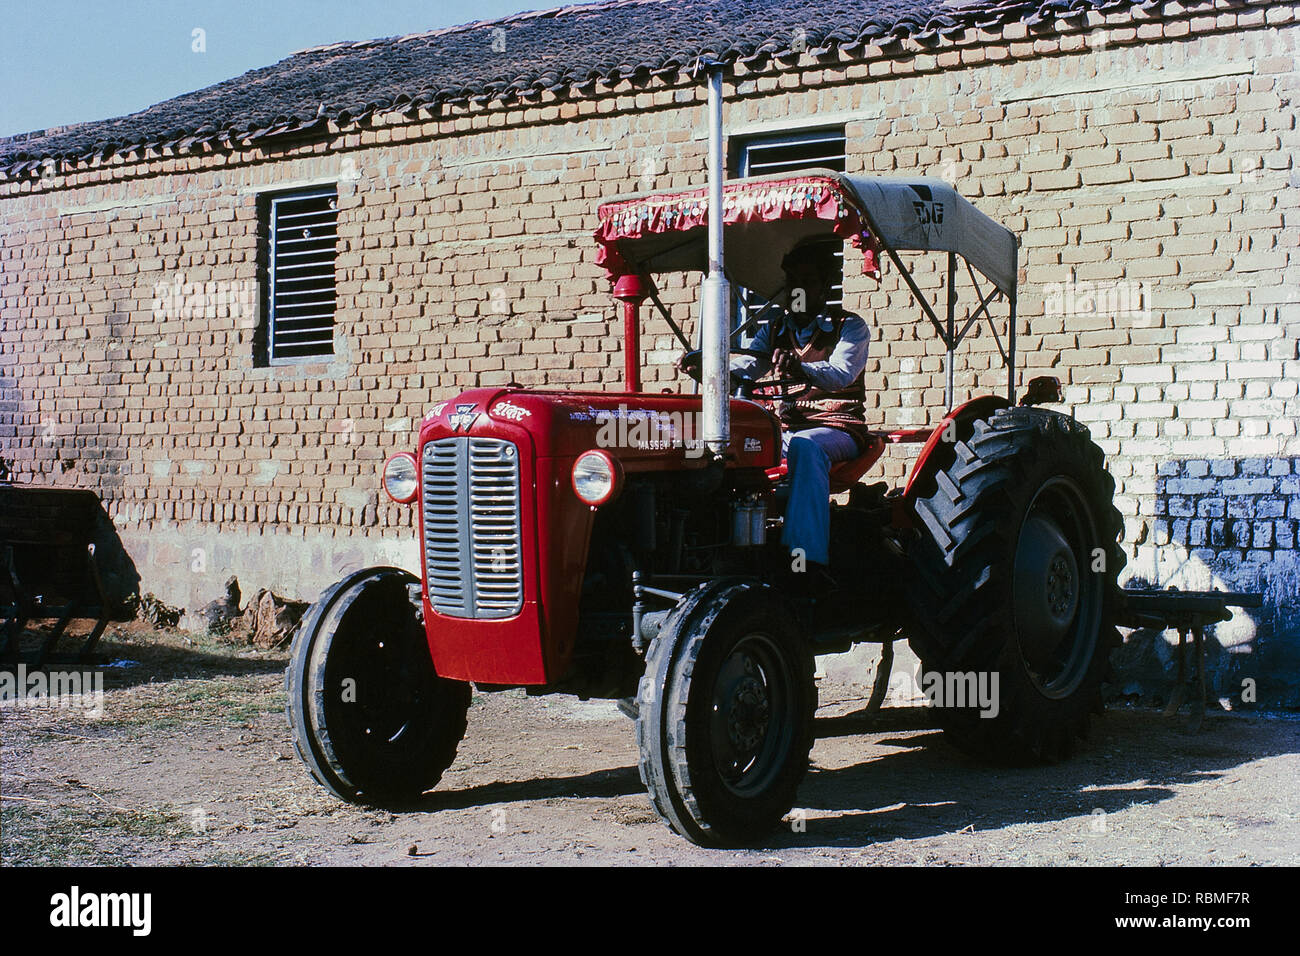 Red colour tractor parked in front of brick wall, India, Asia Stock Photo